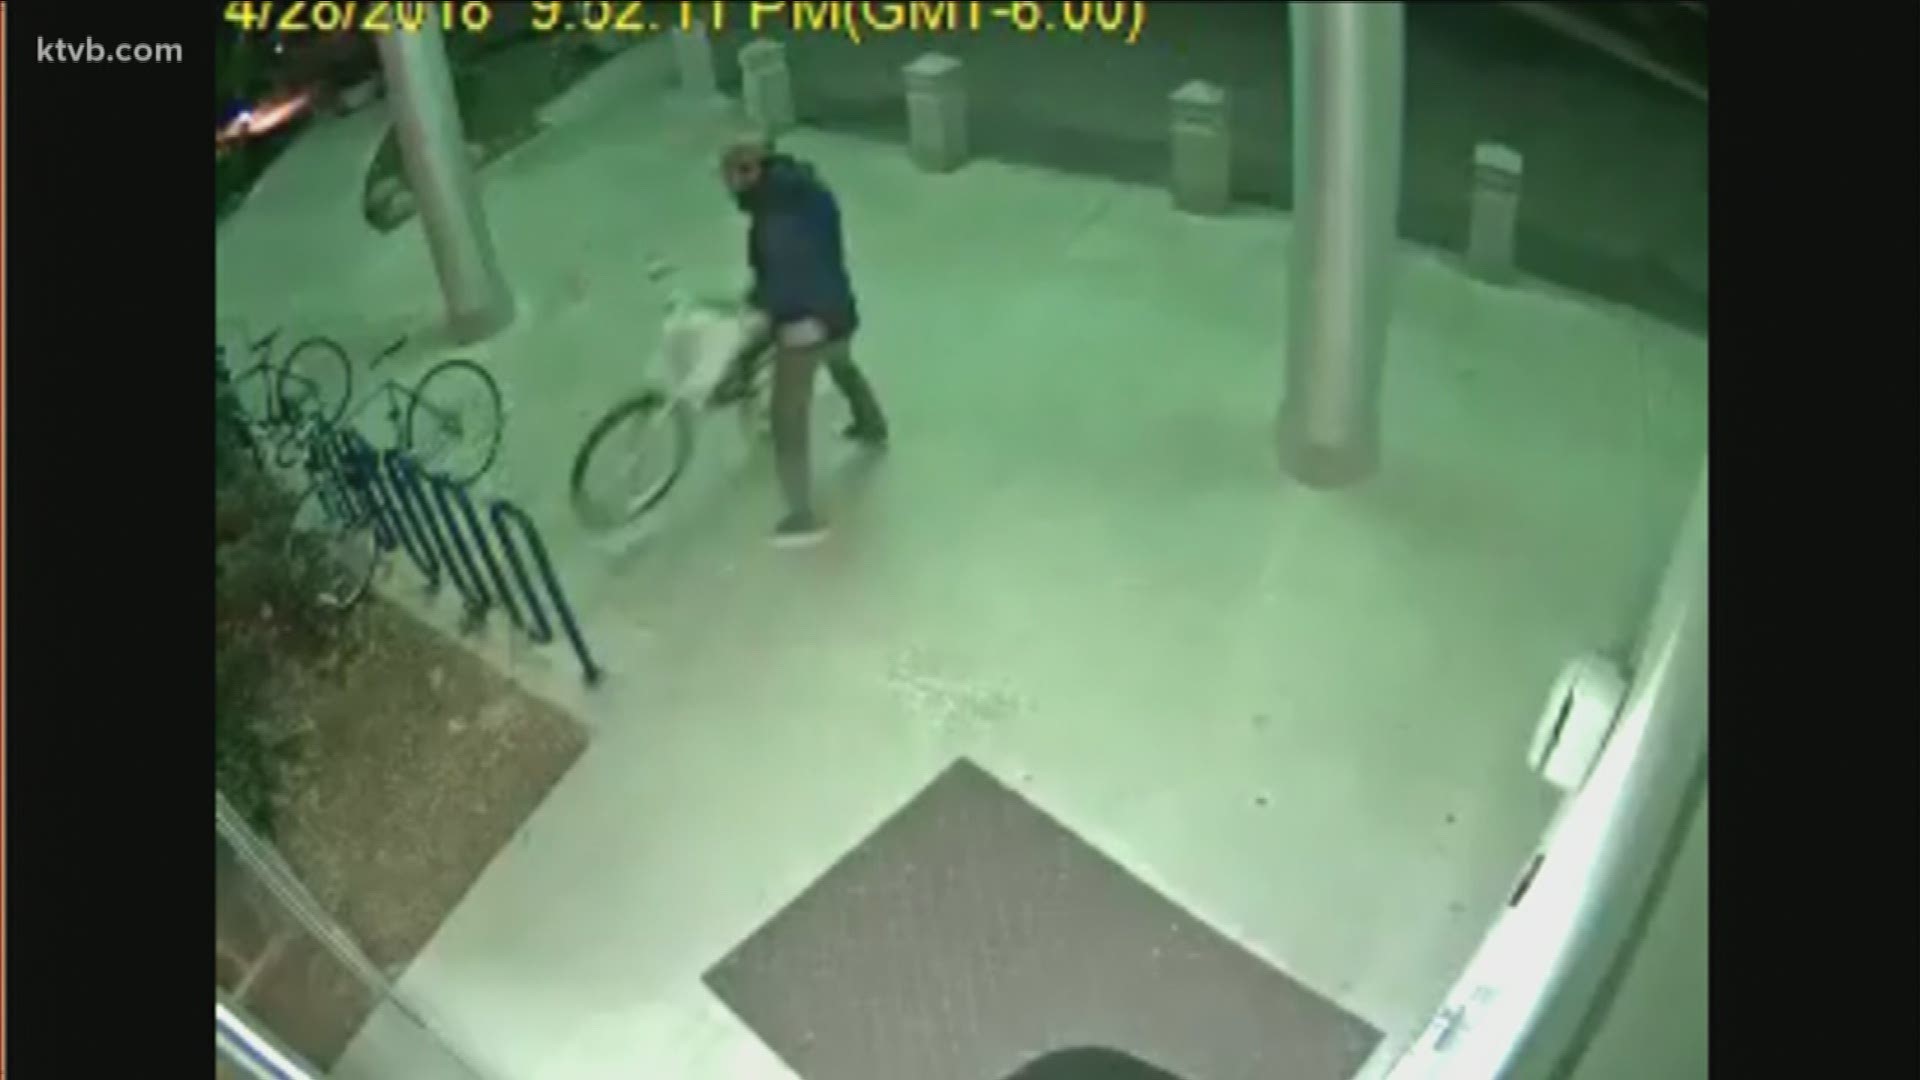 Police are hoping someone can identify the man.